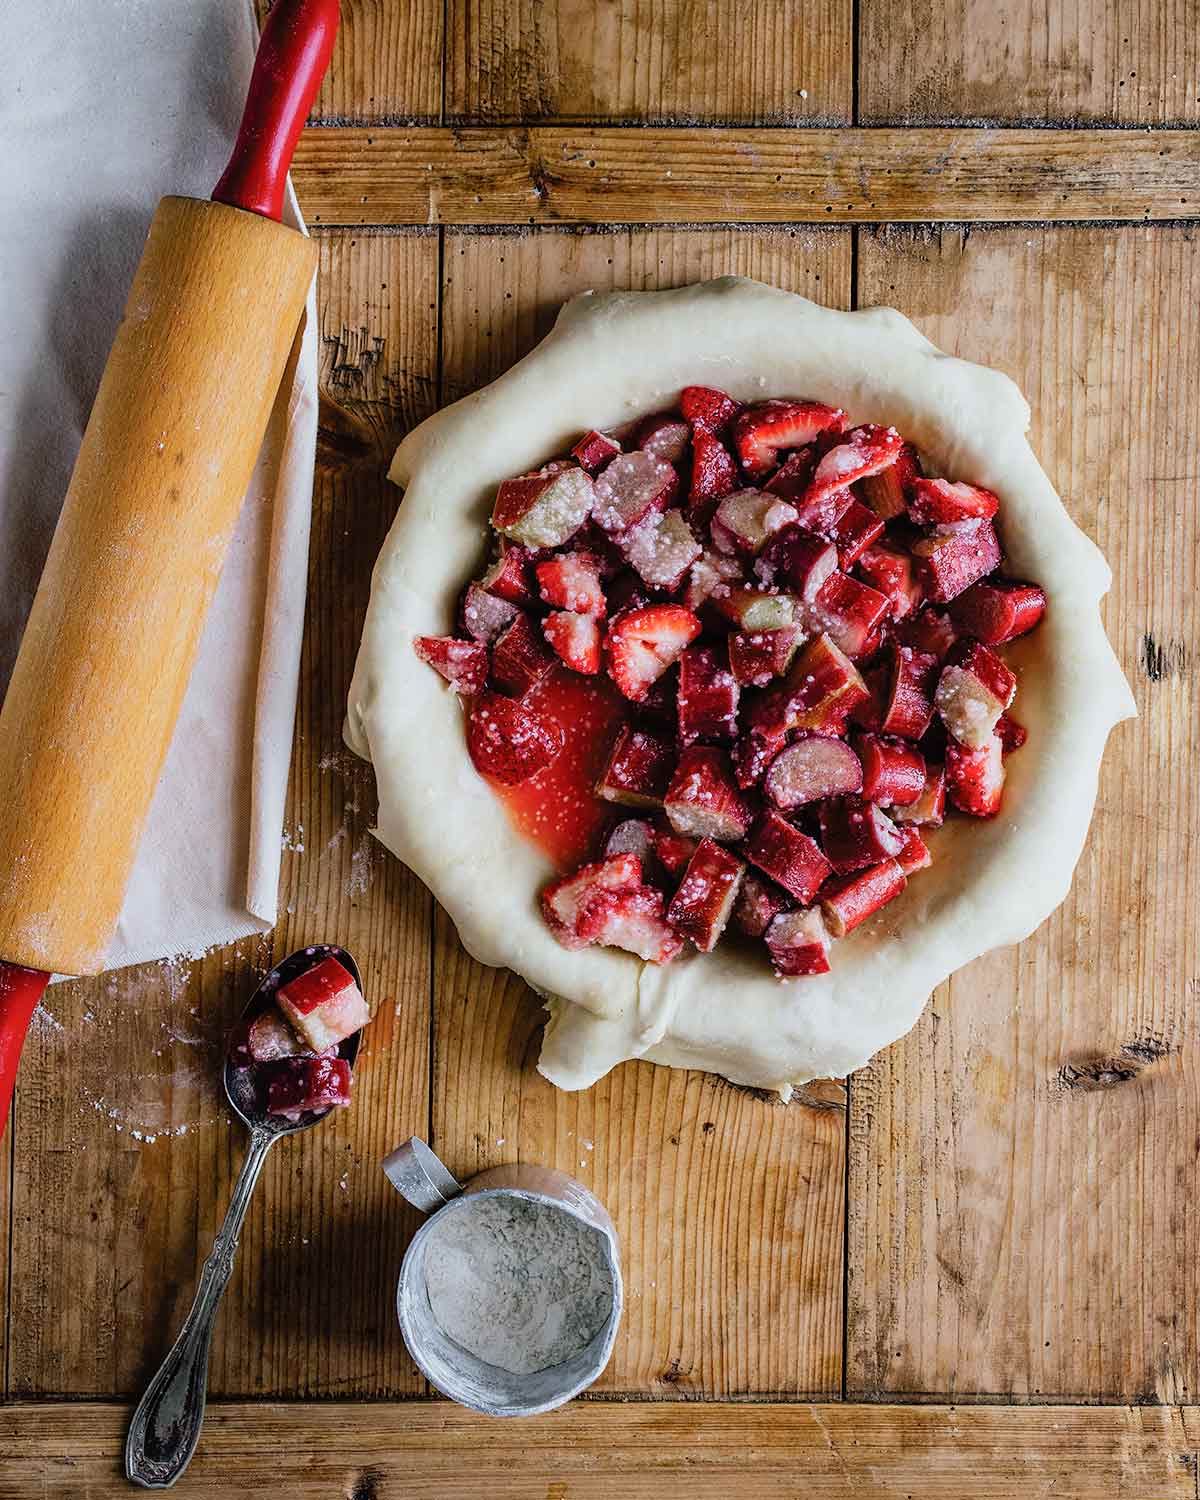 An unbaked pie crust filled with strawberries and rhubarb for the podcast Talking With My Mouth Full, Ep. 33: Kate McDermott: How to Make Pie Crust.